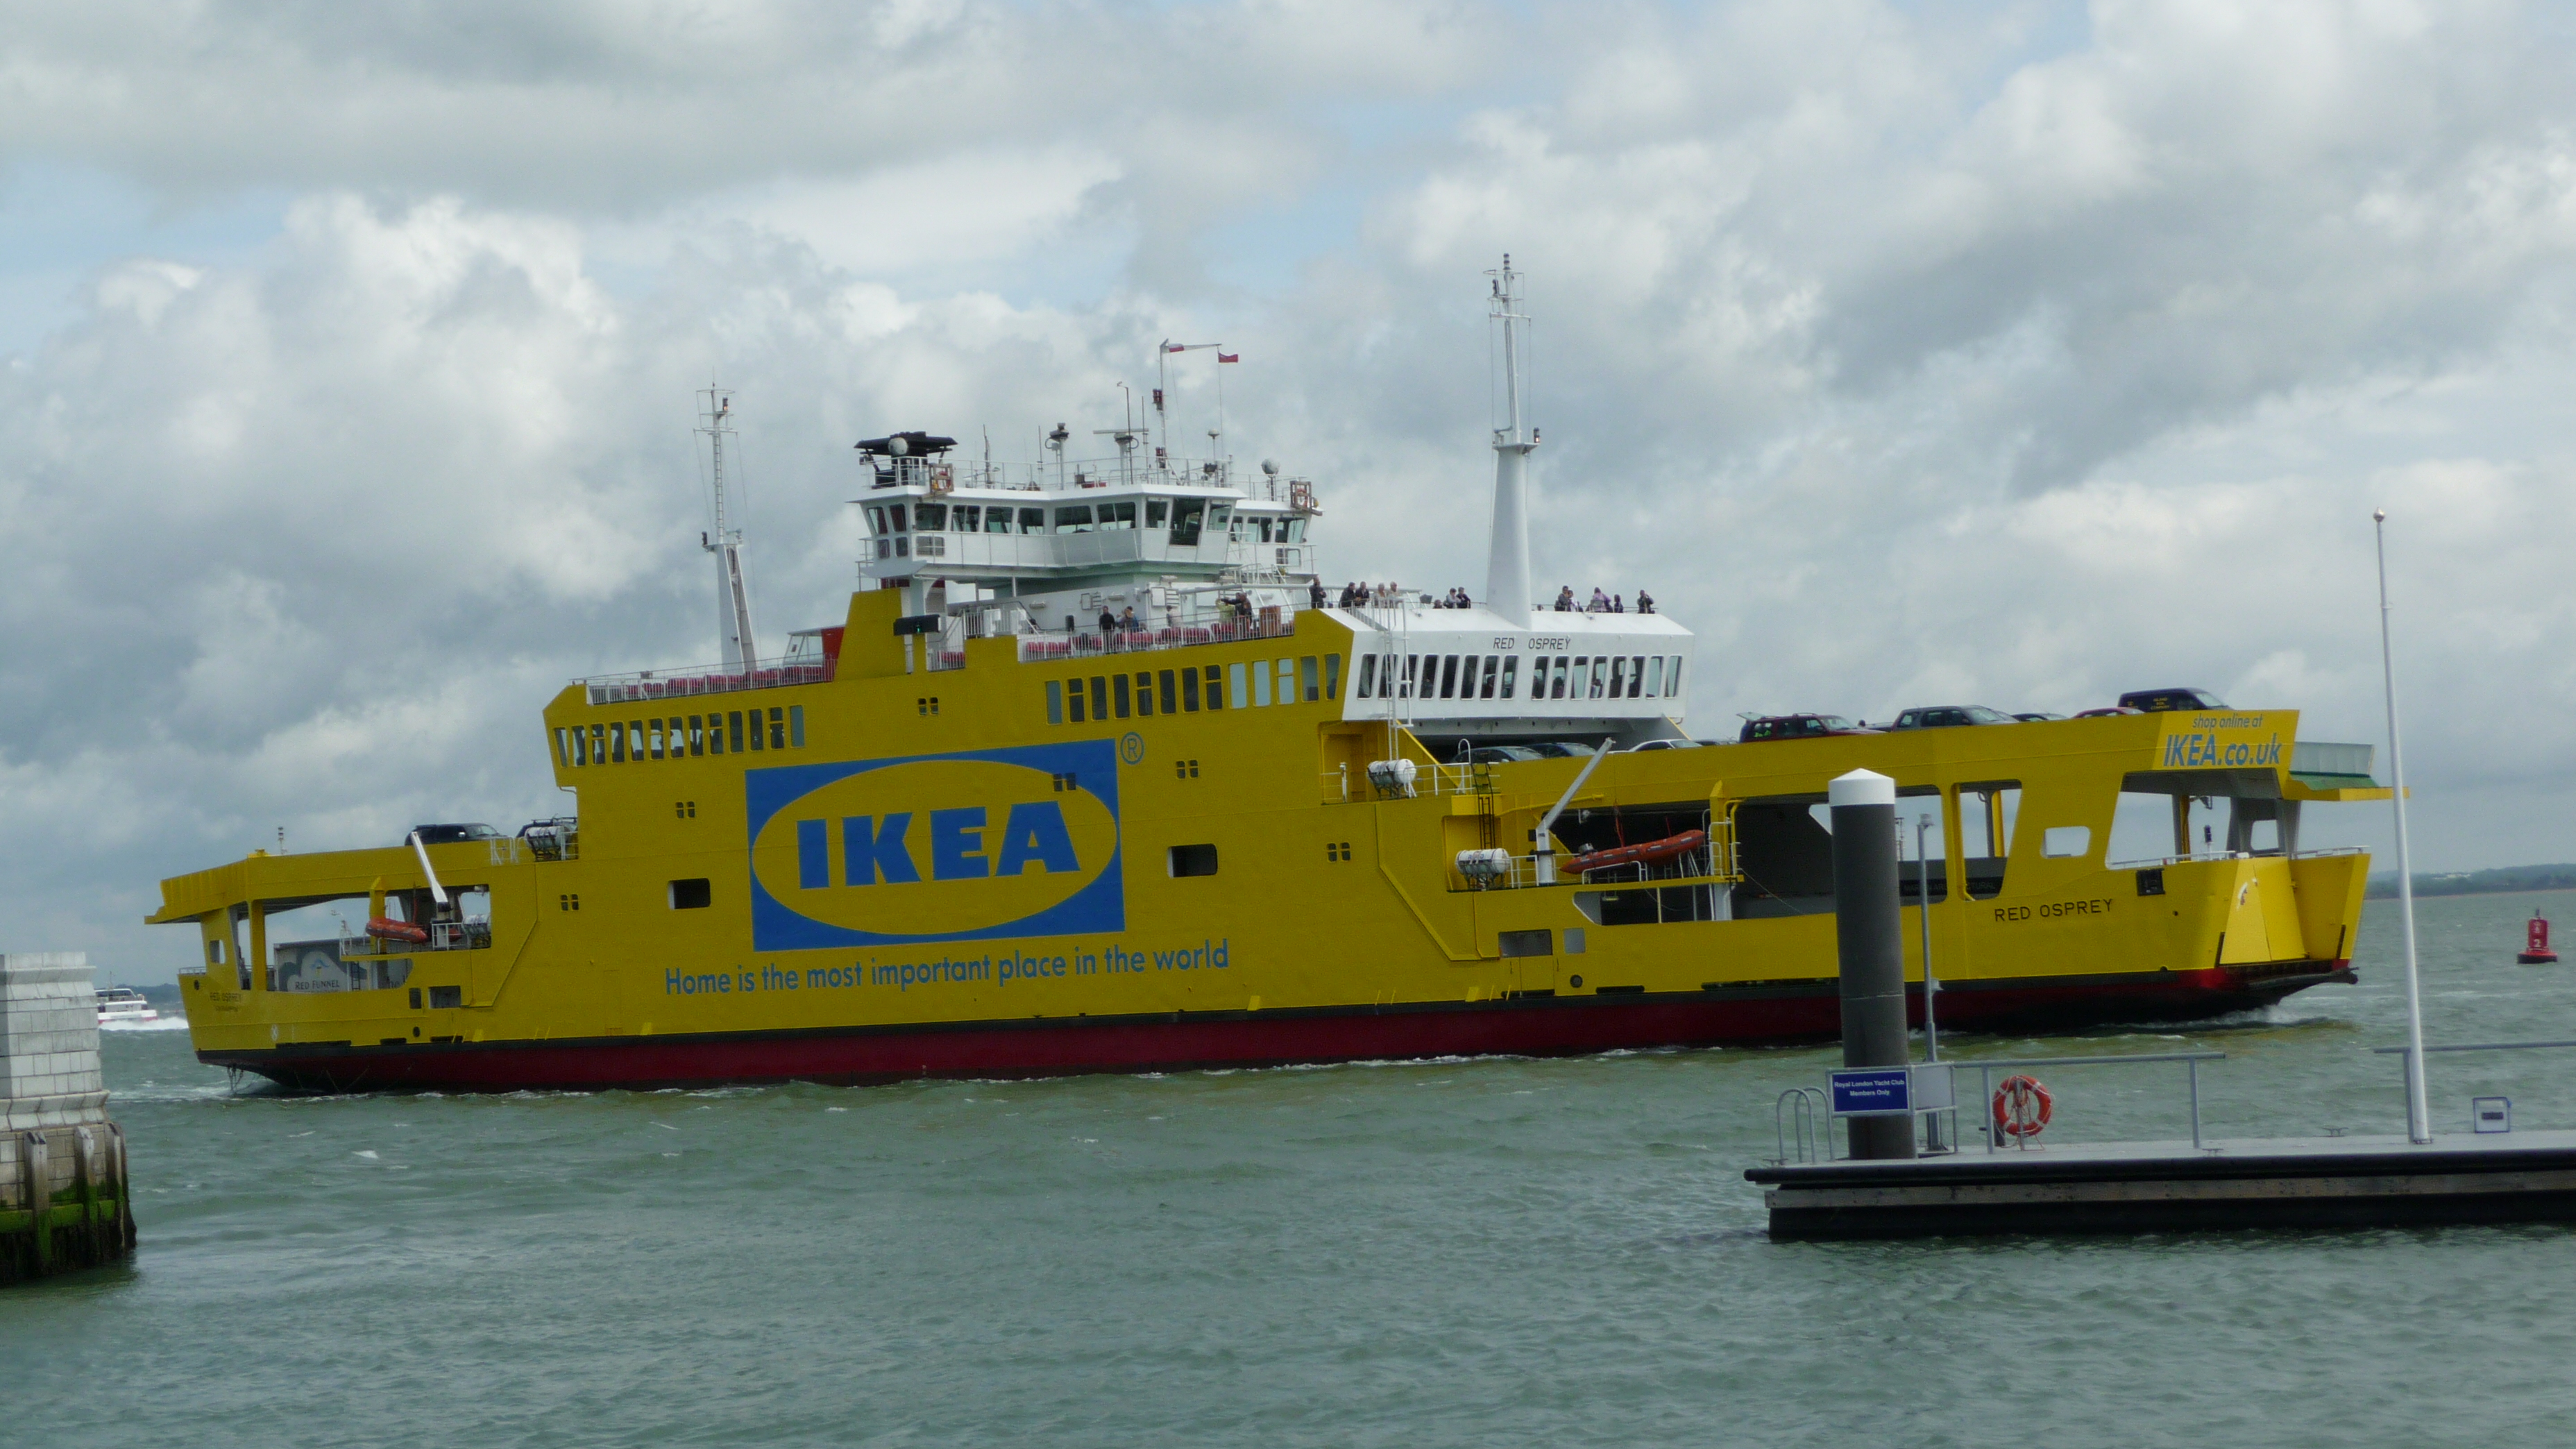 File:Red Funnel Red IKEA livery - Commons